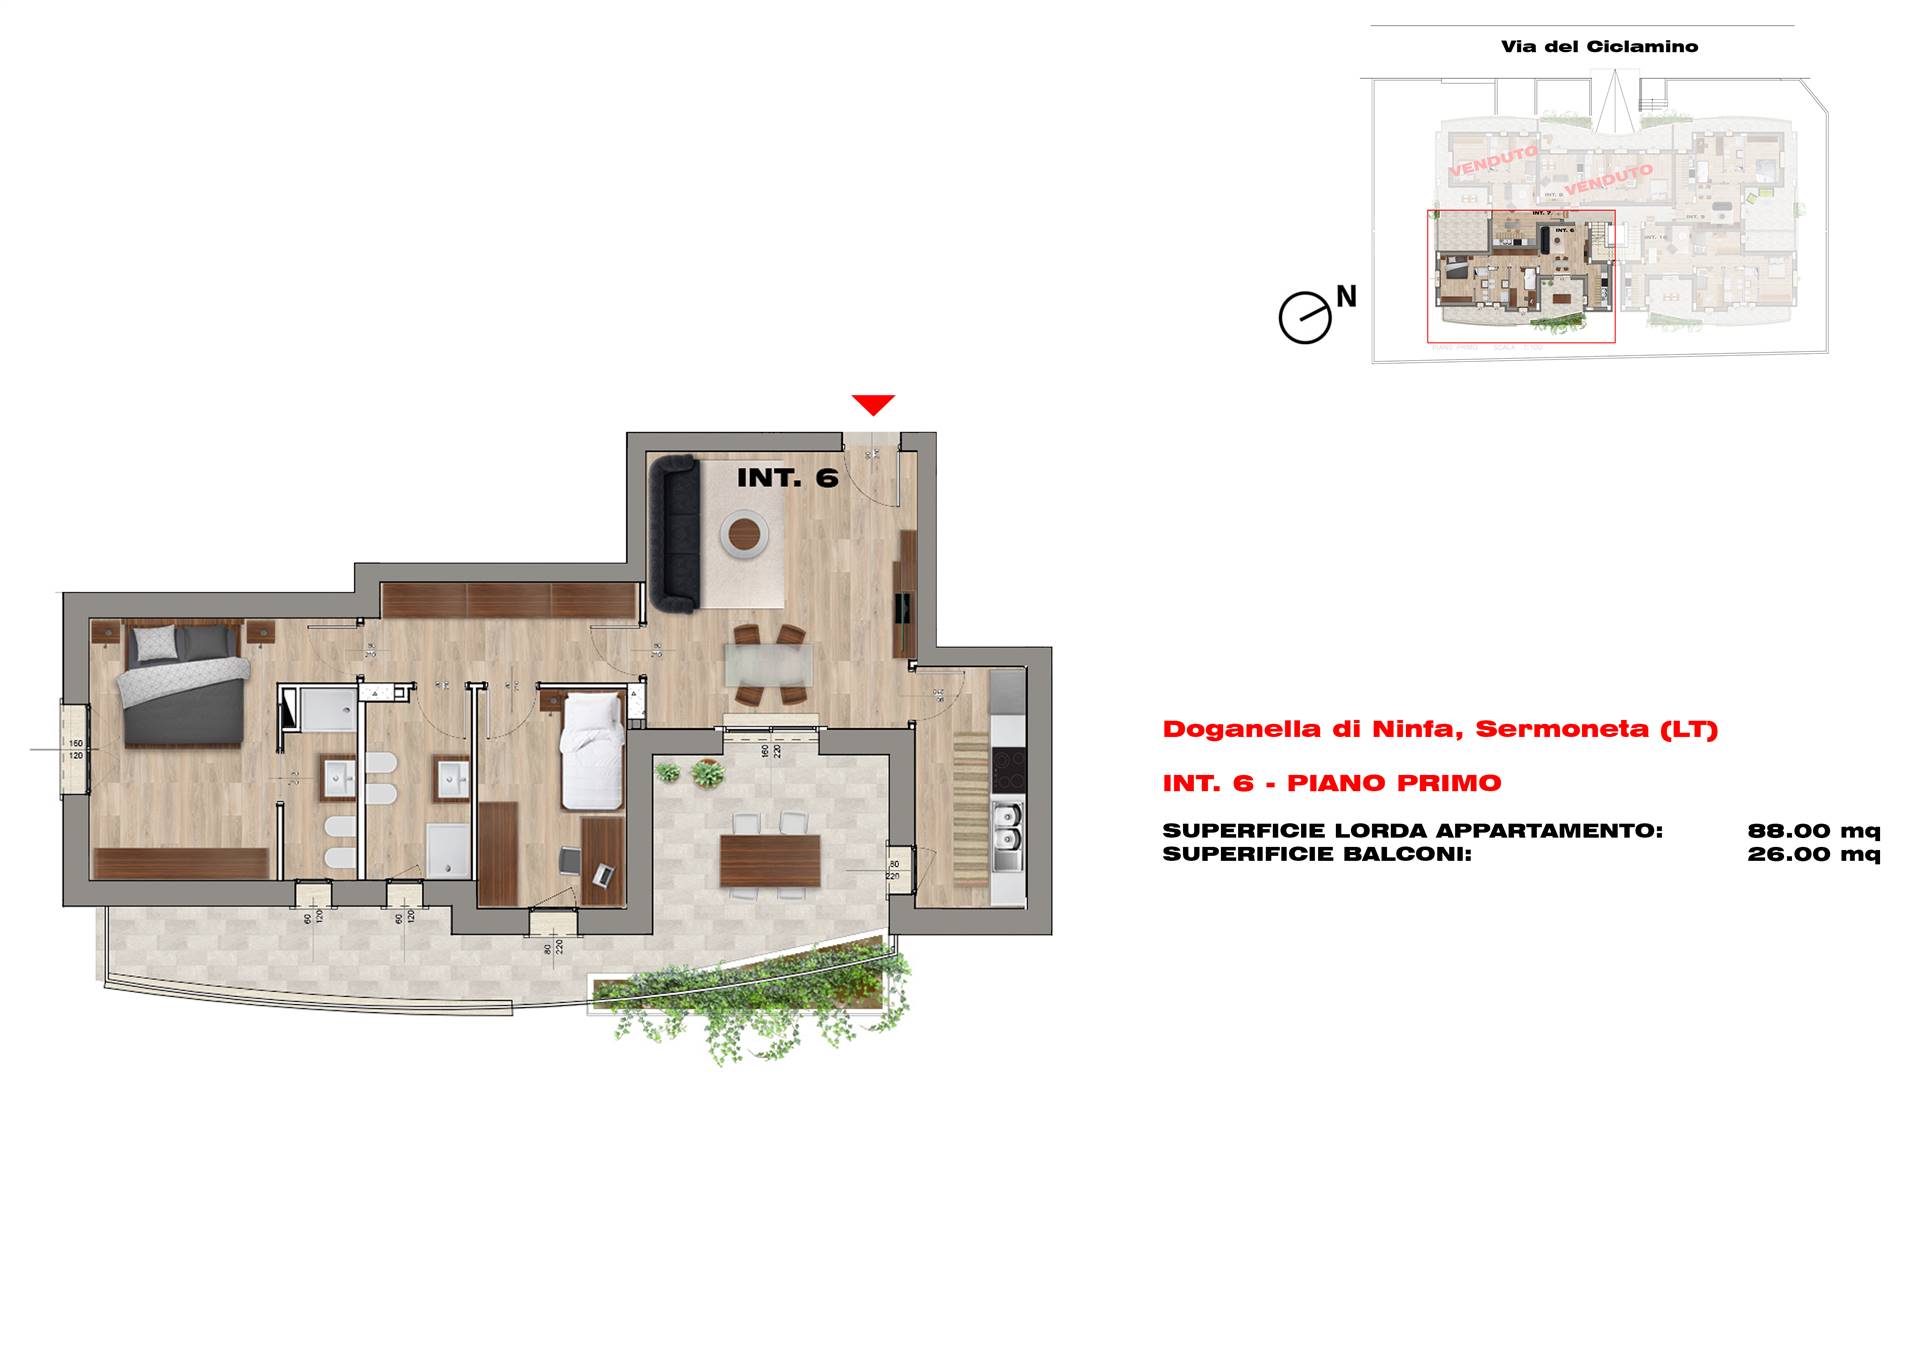 BIVIO DI DOGANELLA, SERMONETA, Apartment for sale of 88 Sq. mt., New construction, Heating Centralized, Energetic class: G, placed at 1° on 3, 